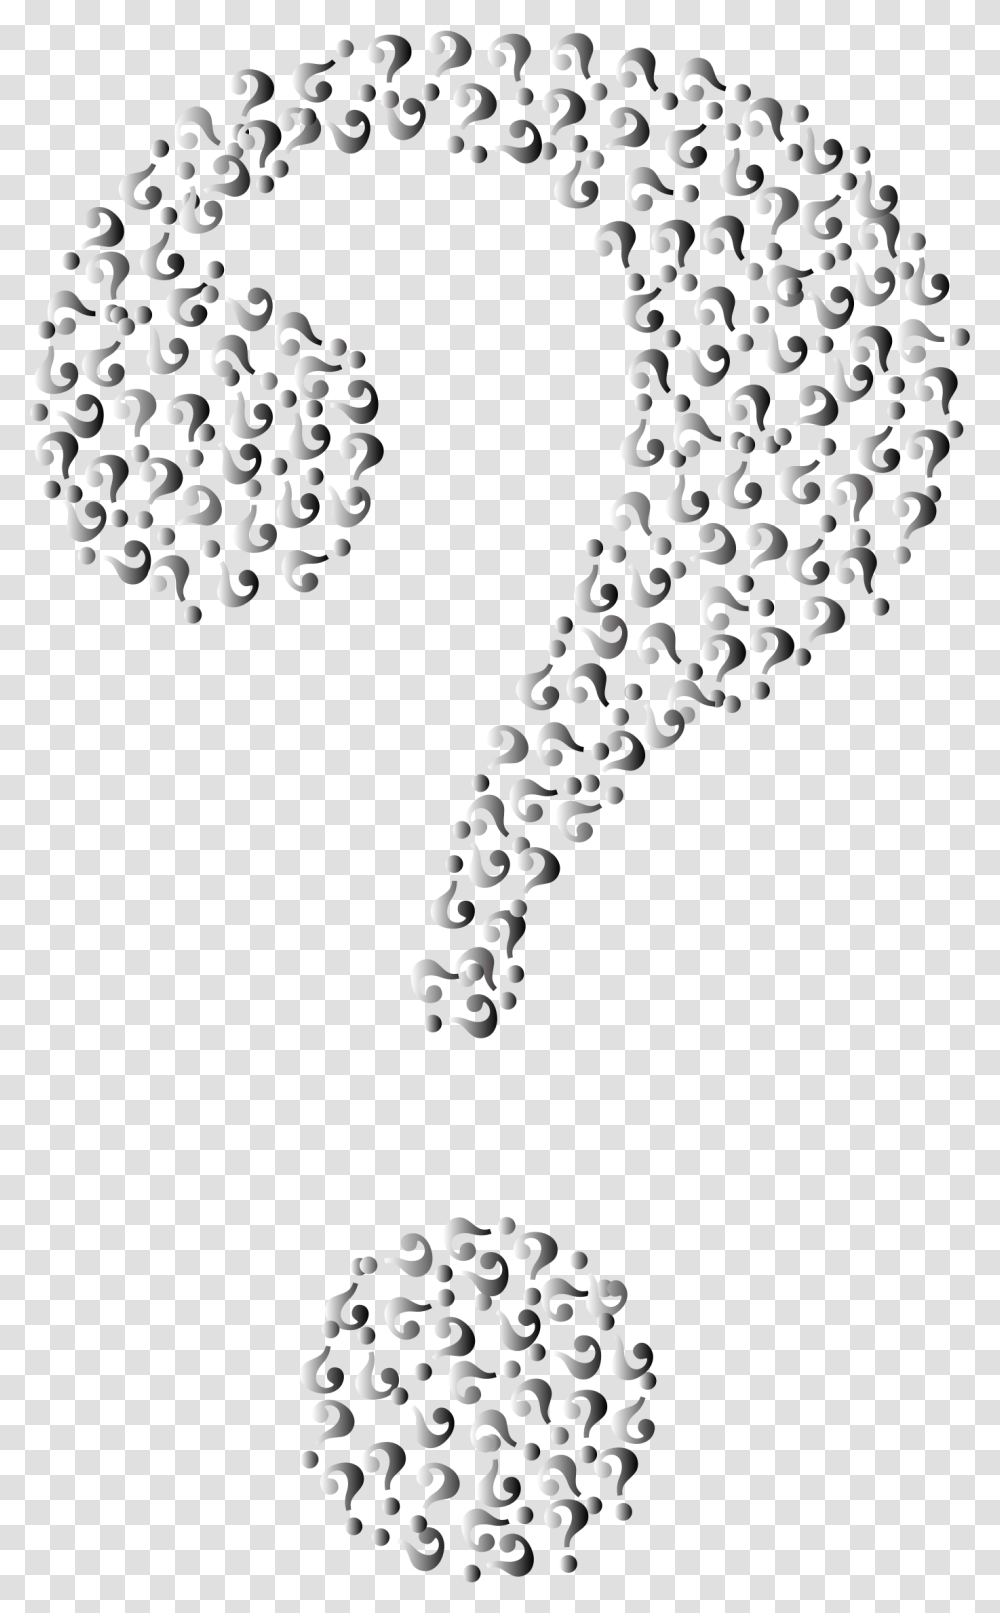 Prismatic Question Mark Fractal 7 No Background Clip Questions Mark No Back Ground, Plant, Outdoors, Food, Nature Transparent Png